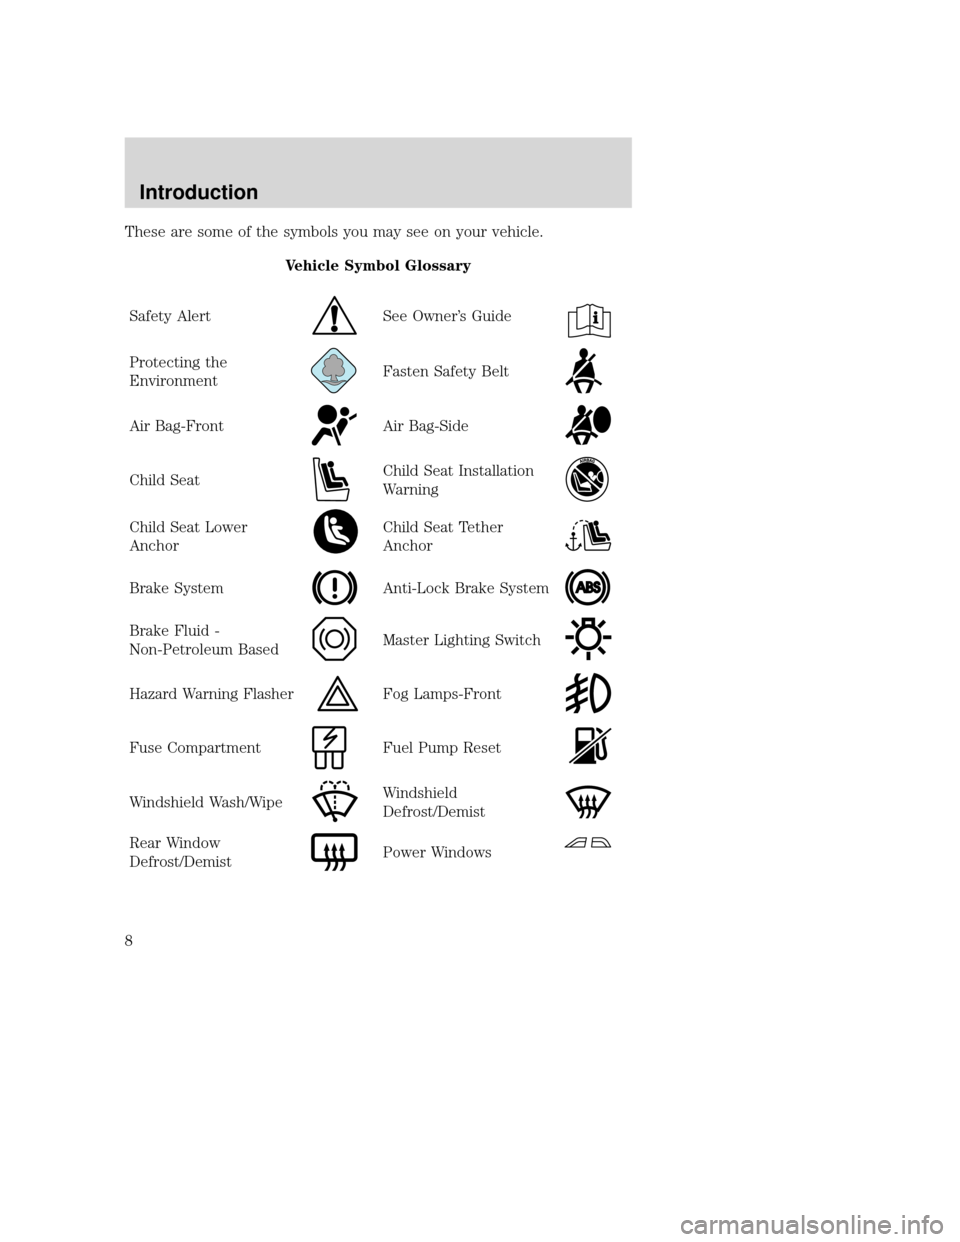 MAZDA MODEL B-SERIES 2004  Owners Manual (in English) These are some of the symbols you may see on your vehicle.Vehicle Symbol Glossary
Safety Alert
See Owner’ s Guide
Protecting the
EnvironmentFasten Safety Belt
Air Bag-FrontAir Bag-Side
Child SeatChi